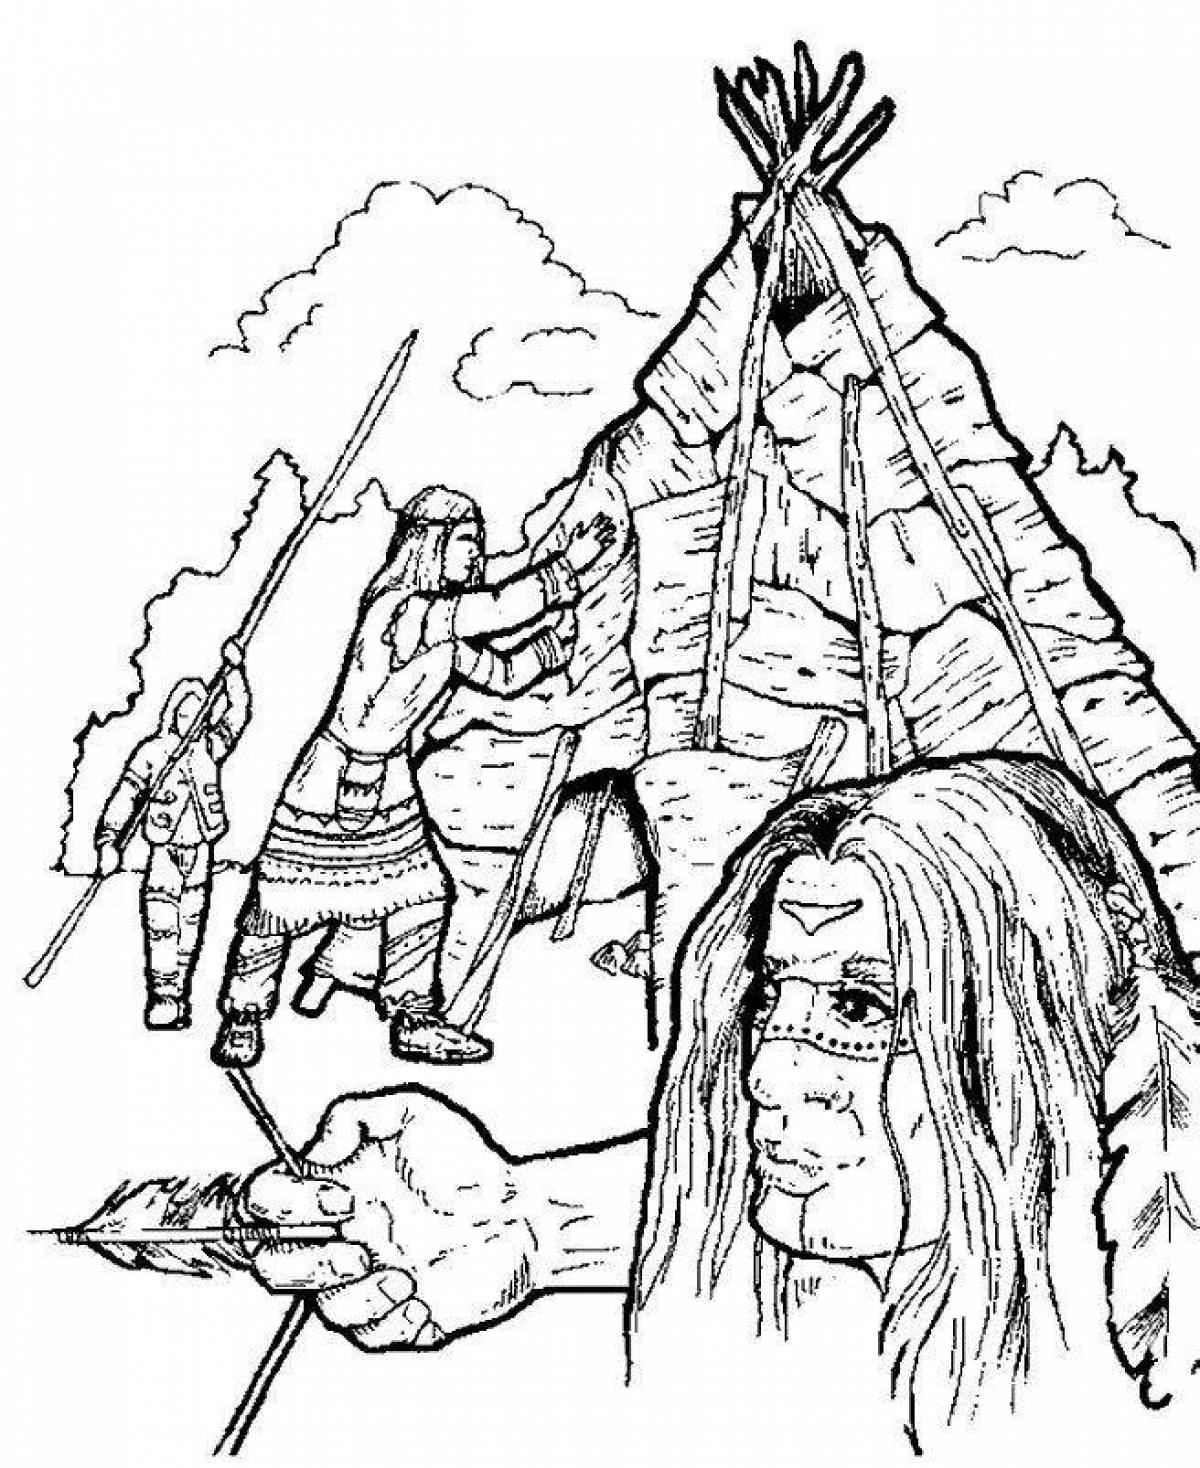 Fighting Indians coloring page